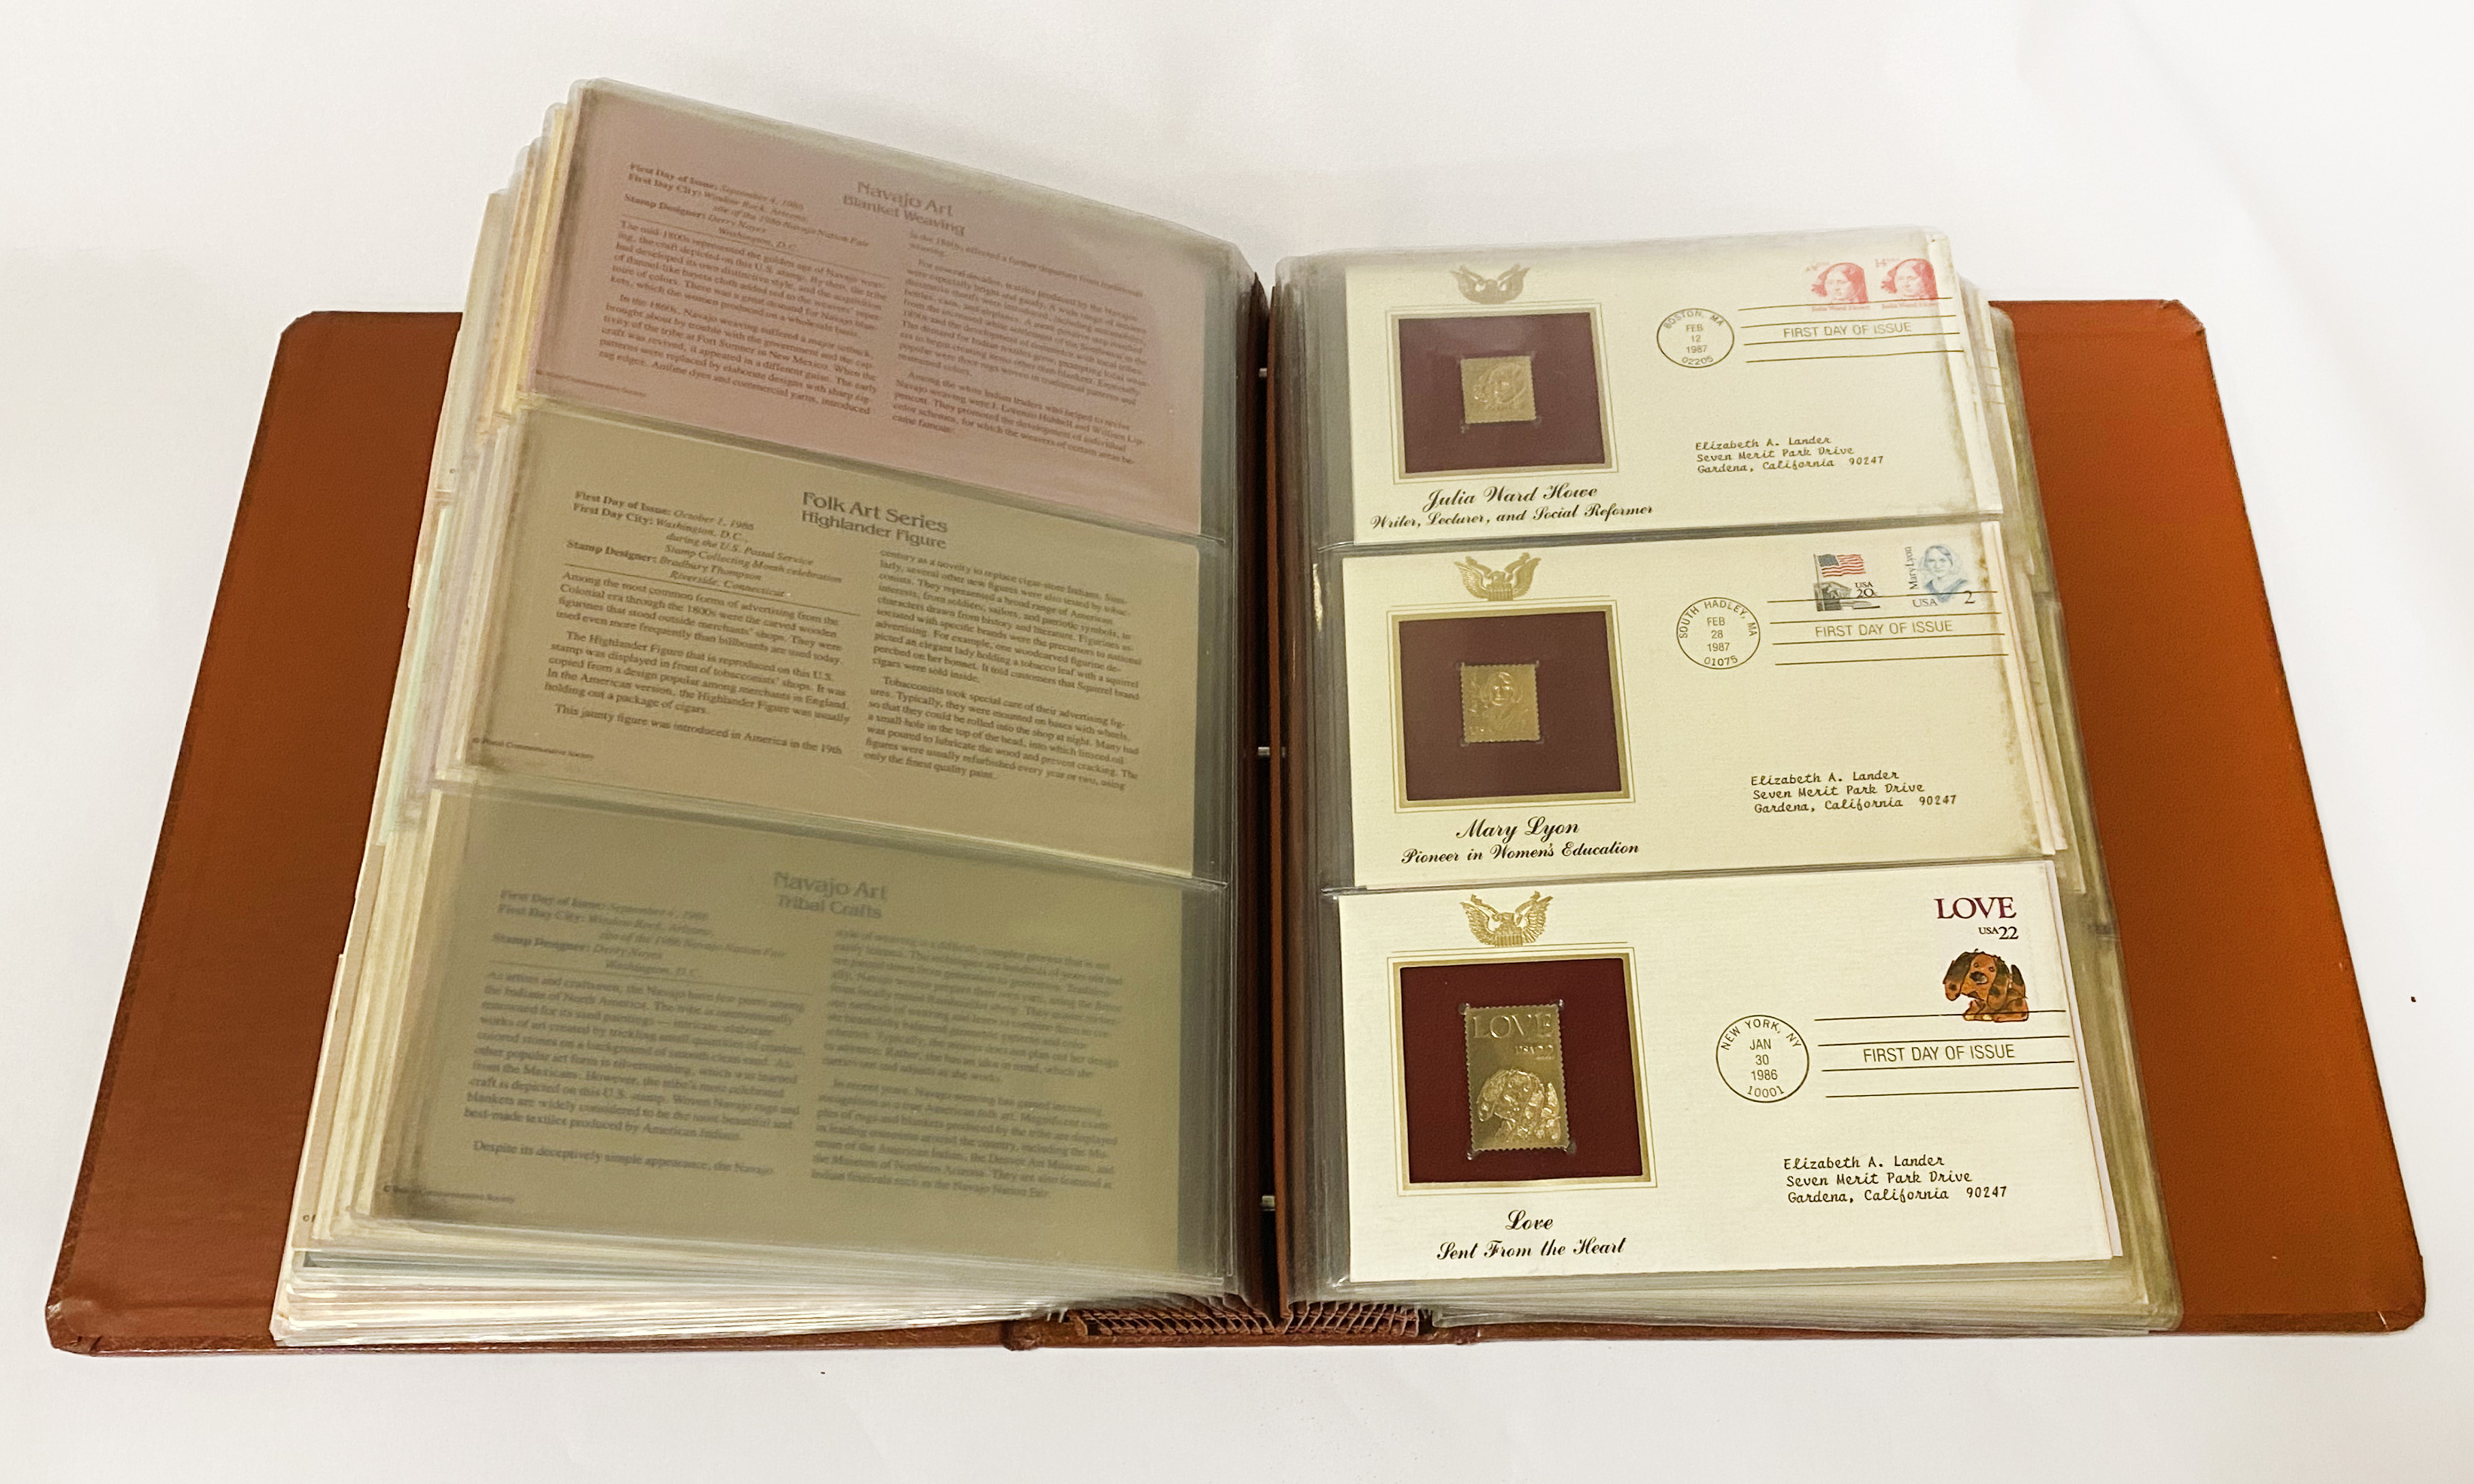 GOLDEN REPLICAS OF UNITED STATES STAMPS - PROOF REPLICAS ON 22CT GOLD PLATED - 42 ISSUES - Image 5 of 8